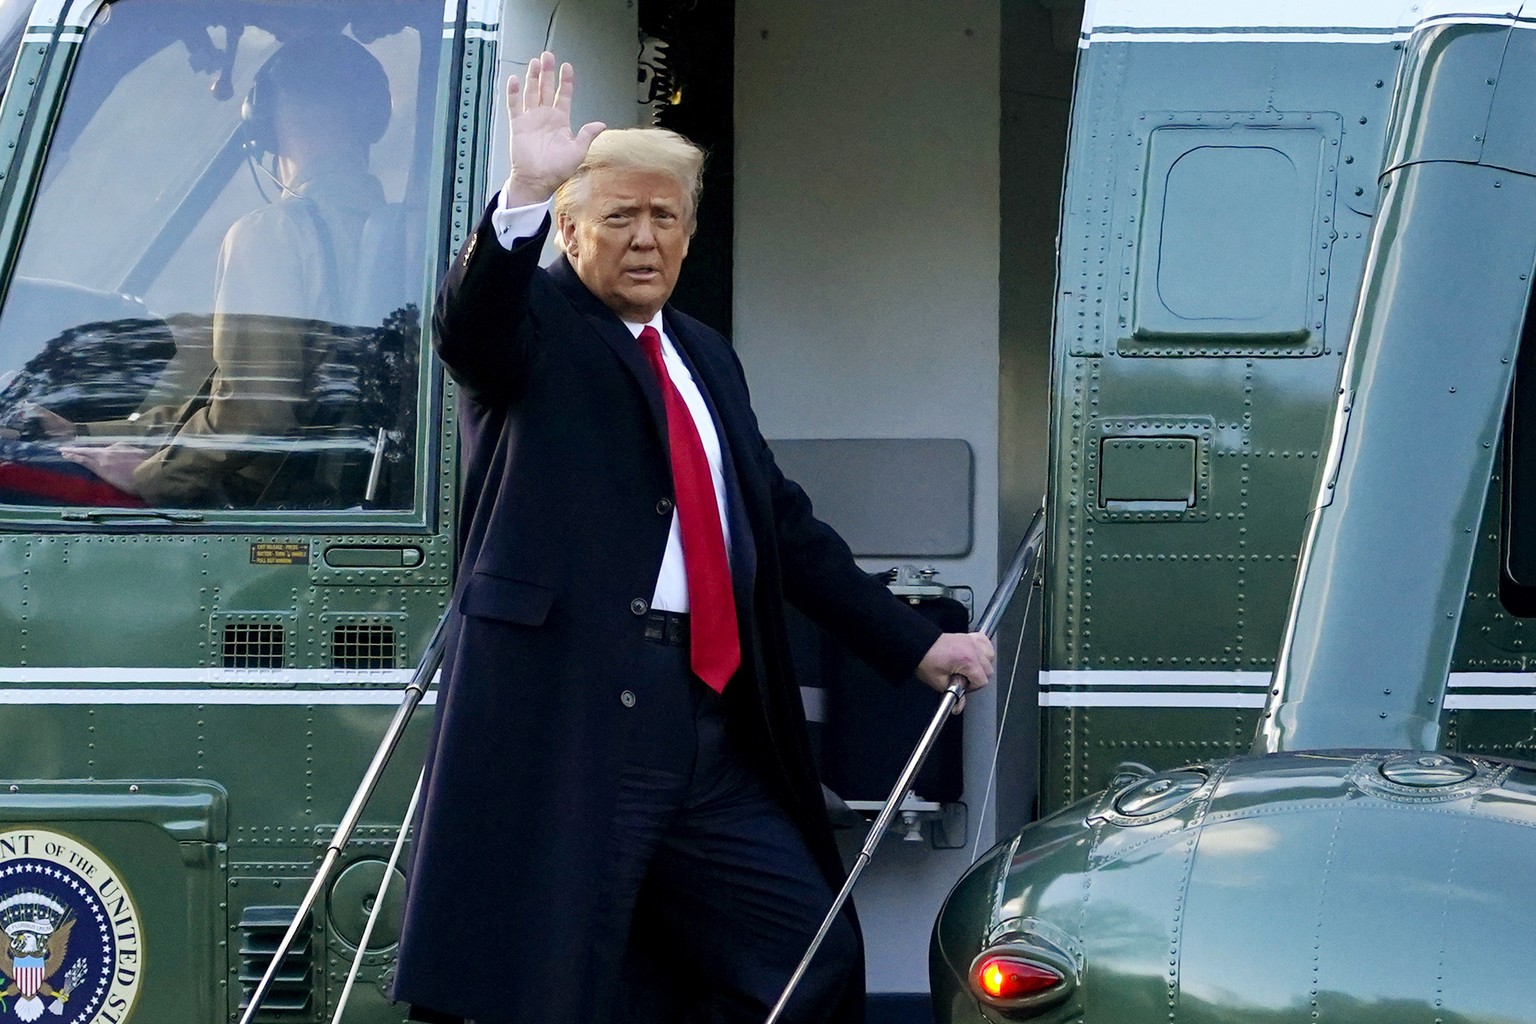 FILE - In this Wednesday, Jan. 20, 2021, file photo, President Donald Trump waves as he boards Marine One on the South Lawn of the White House, in Washington, en route to his Mar-a-Lago Florida Resort ...